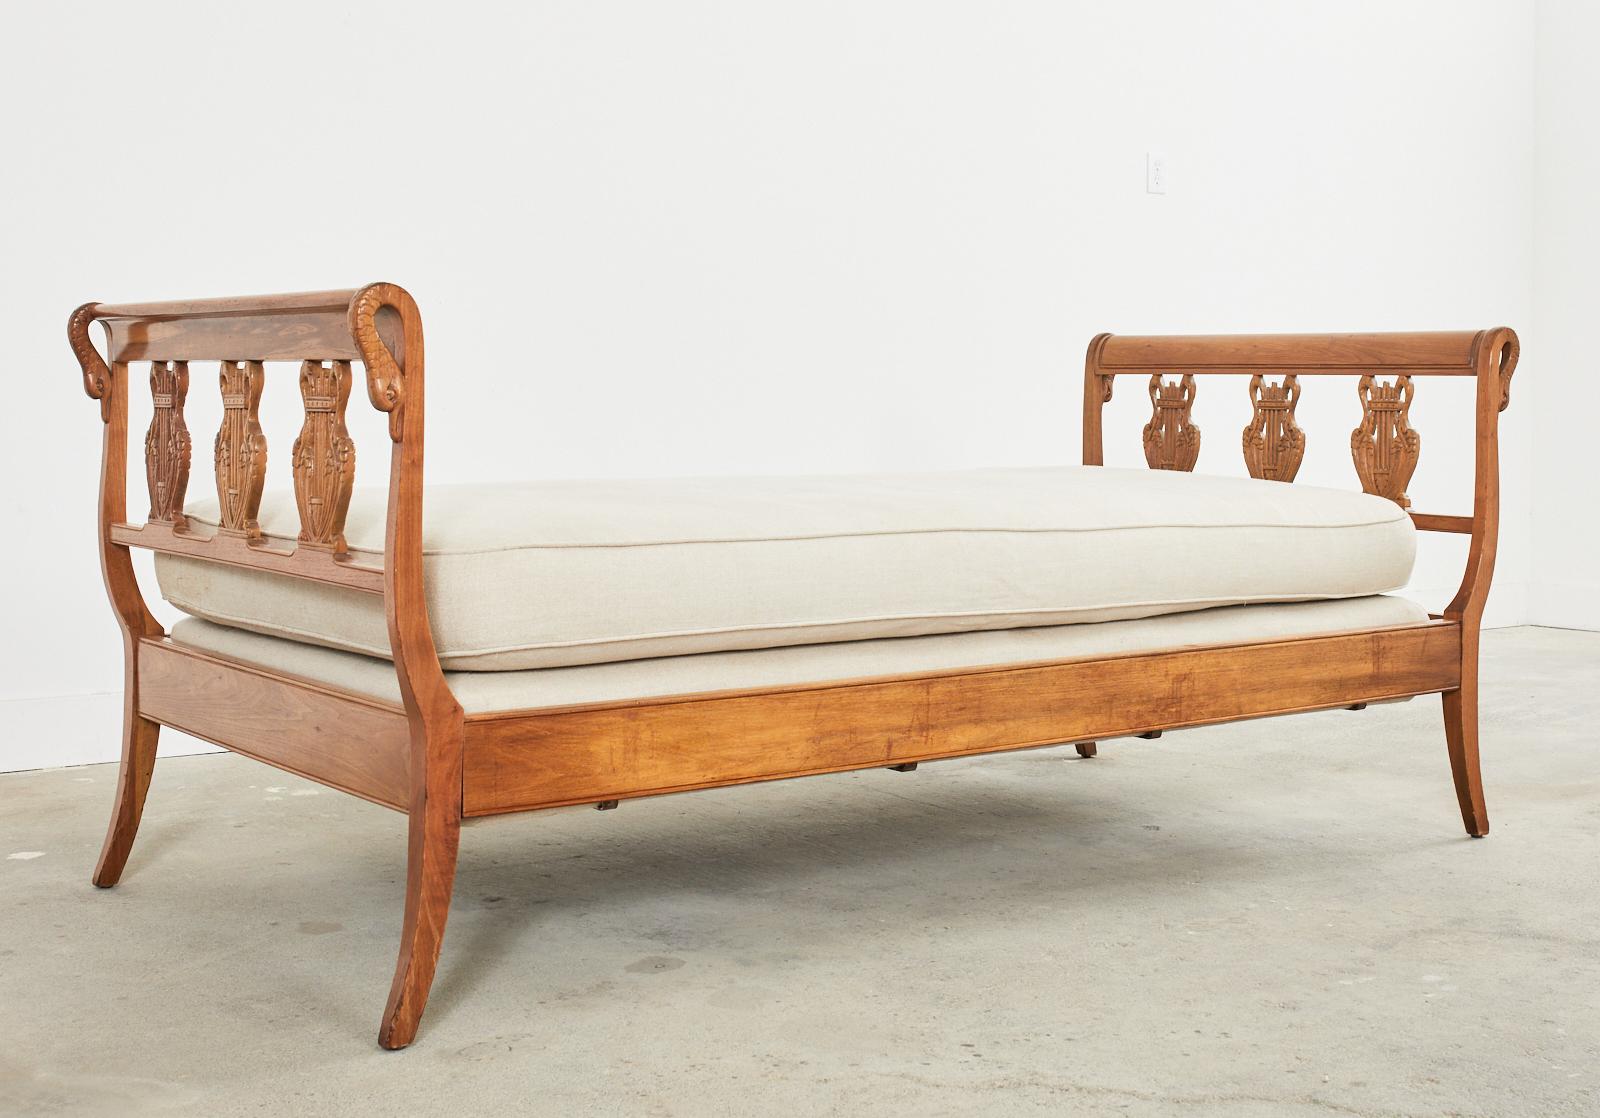 Hand-Crafted Neoclassical French Empire Style Swan Neck Daybed